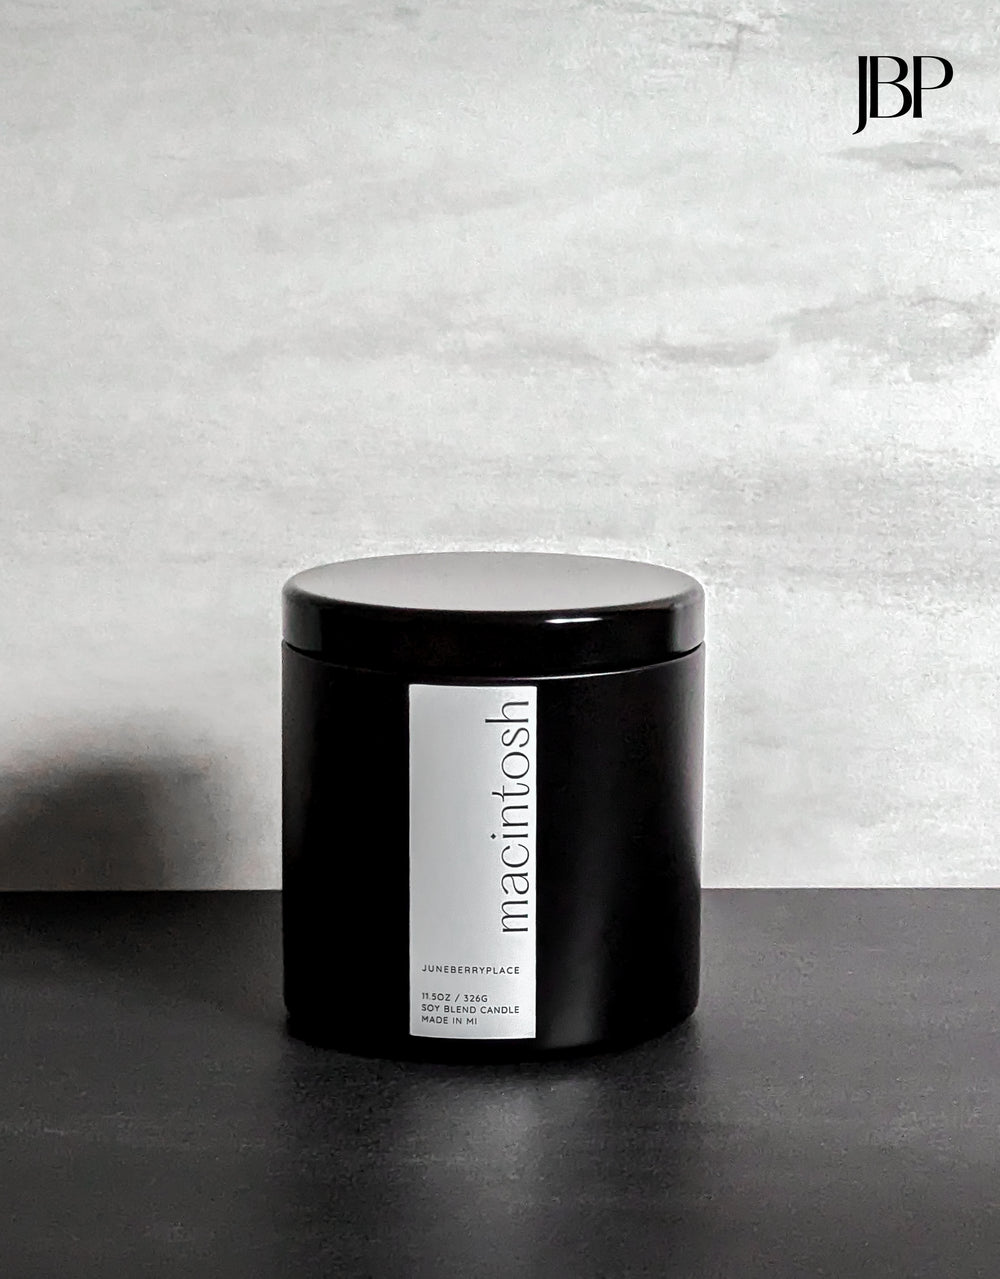 Macintosh Wood Wick Soy Candle in matte black vessel by juneberryplace home fragrances